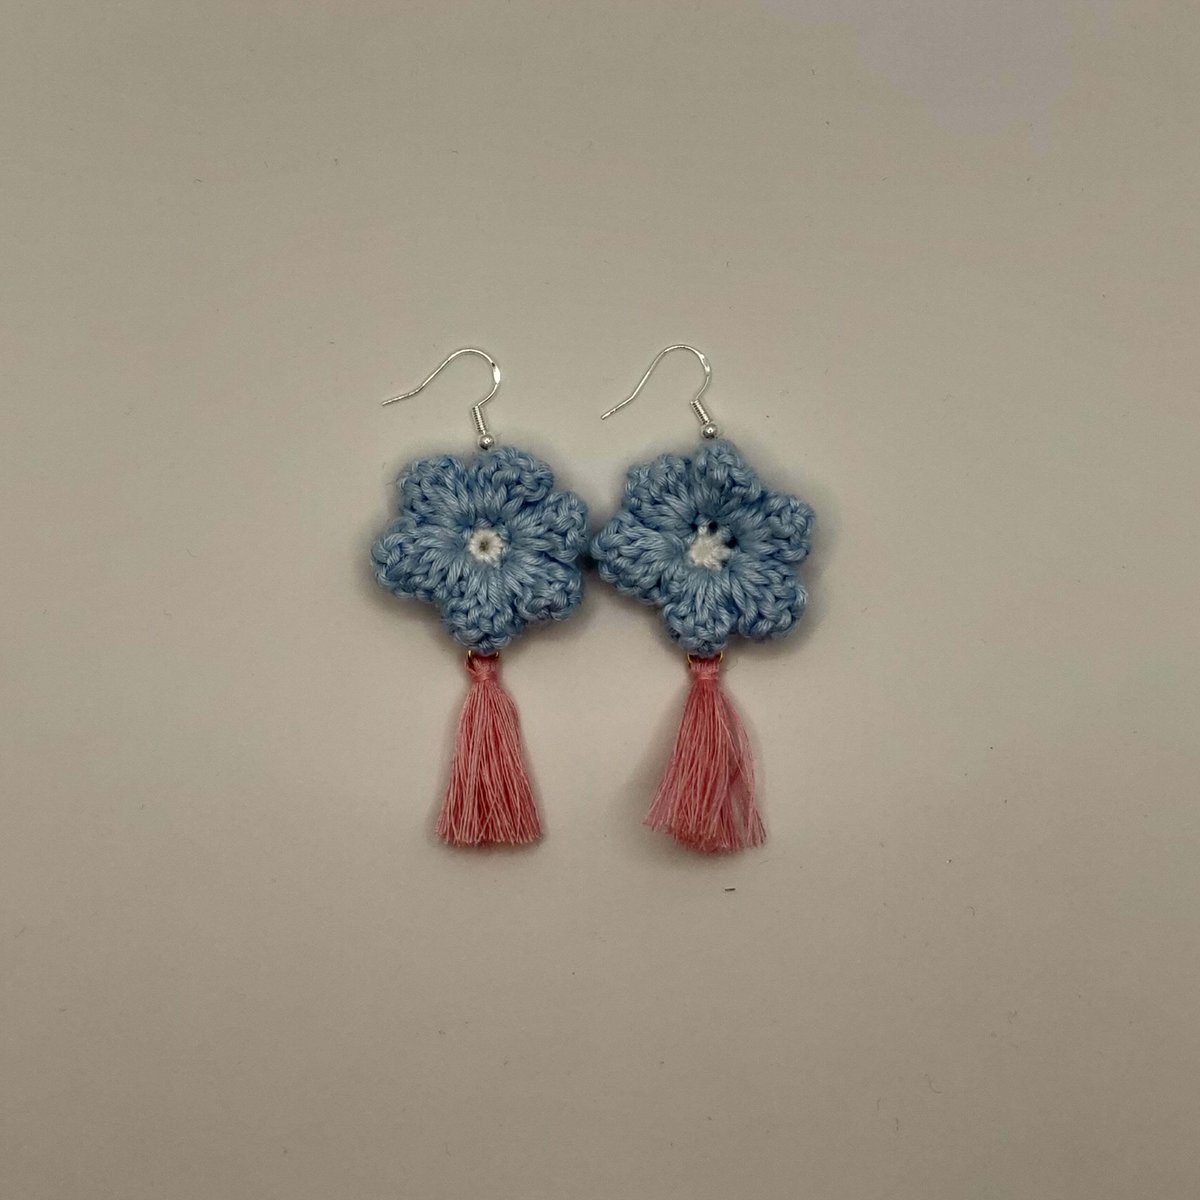 Blue - Pink Flower Earrings - $20.00.
guelphmarket.com/products/blue-…

Tag a friend or give this share! 

#canada #supportlocal